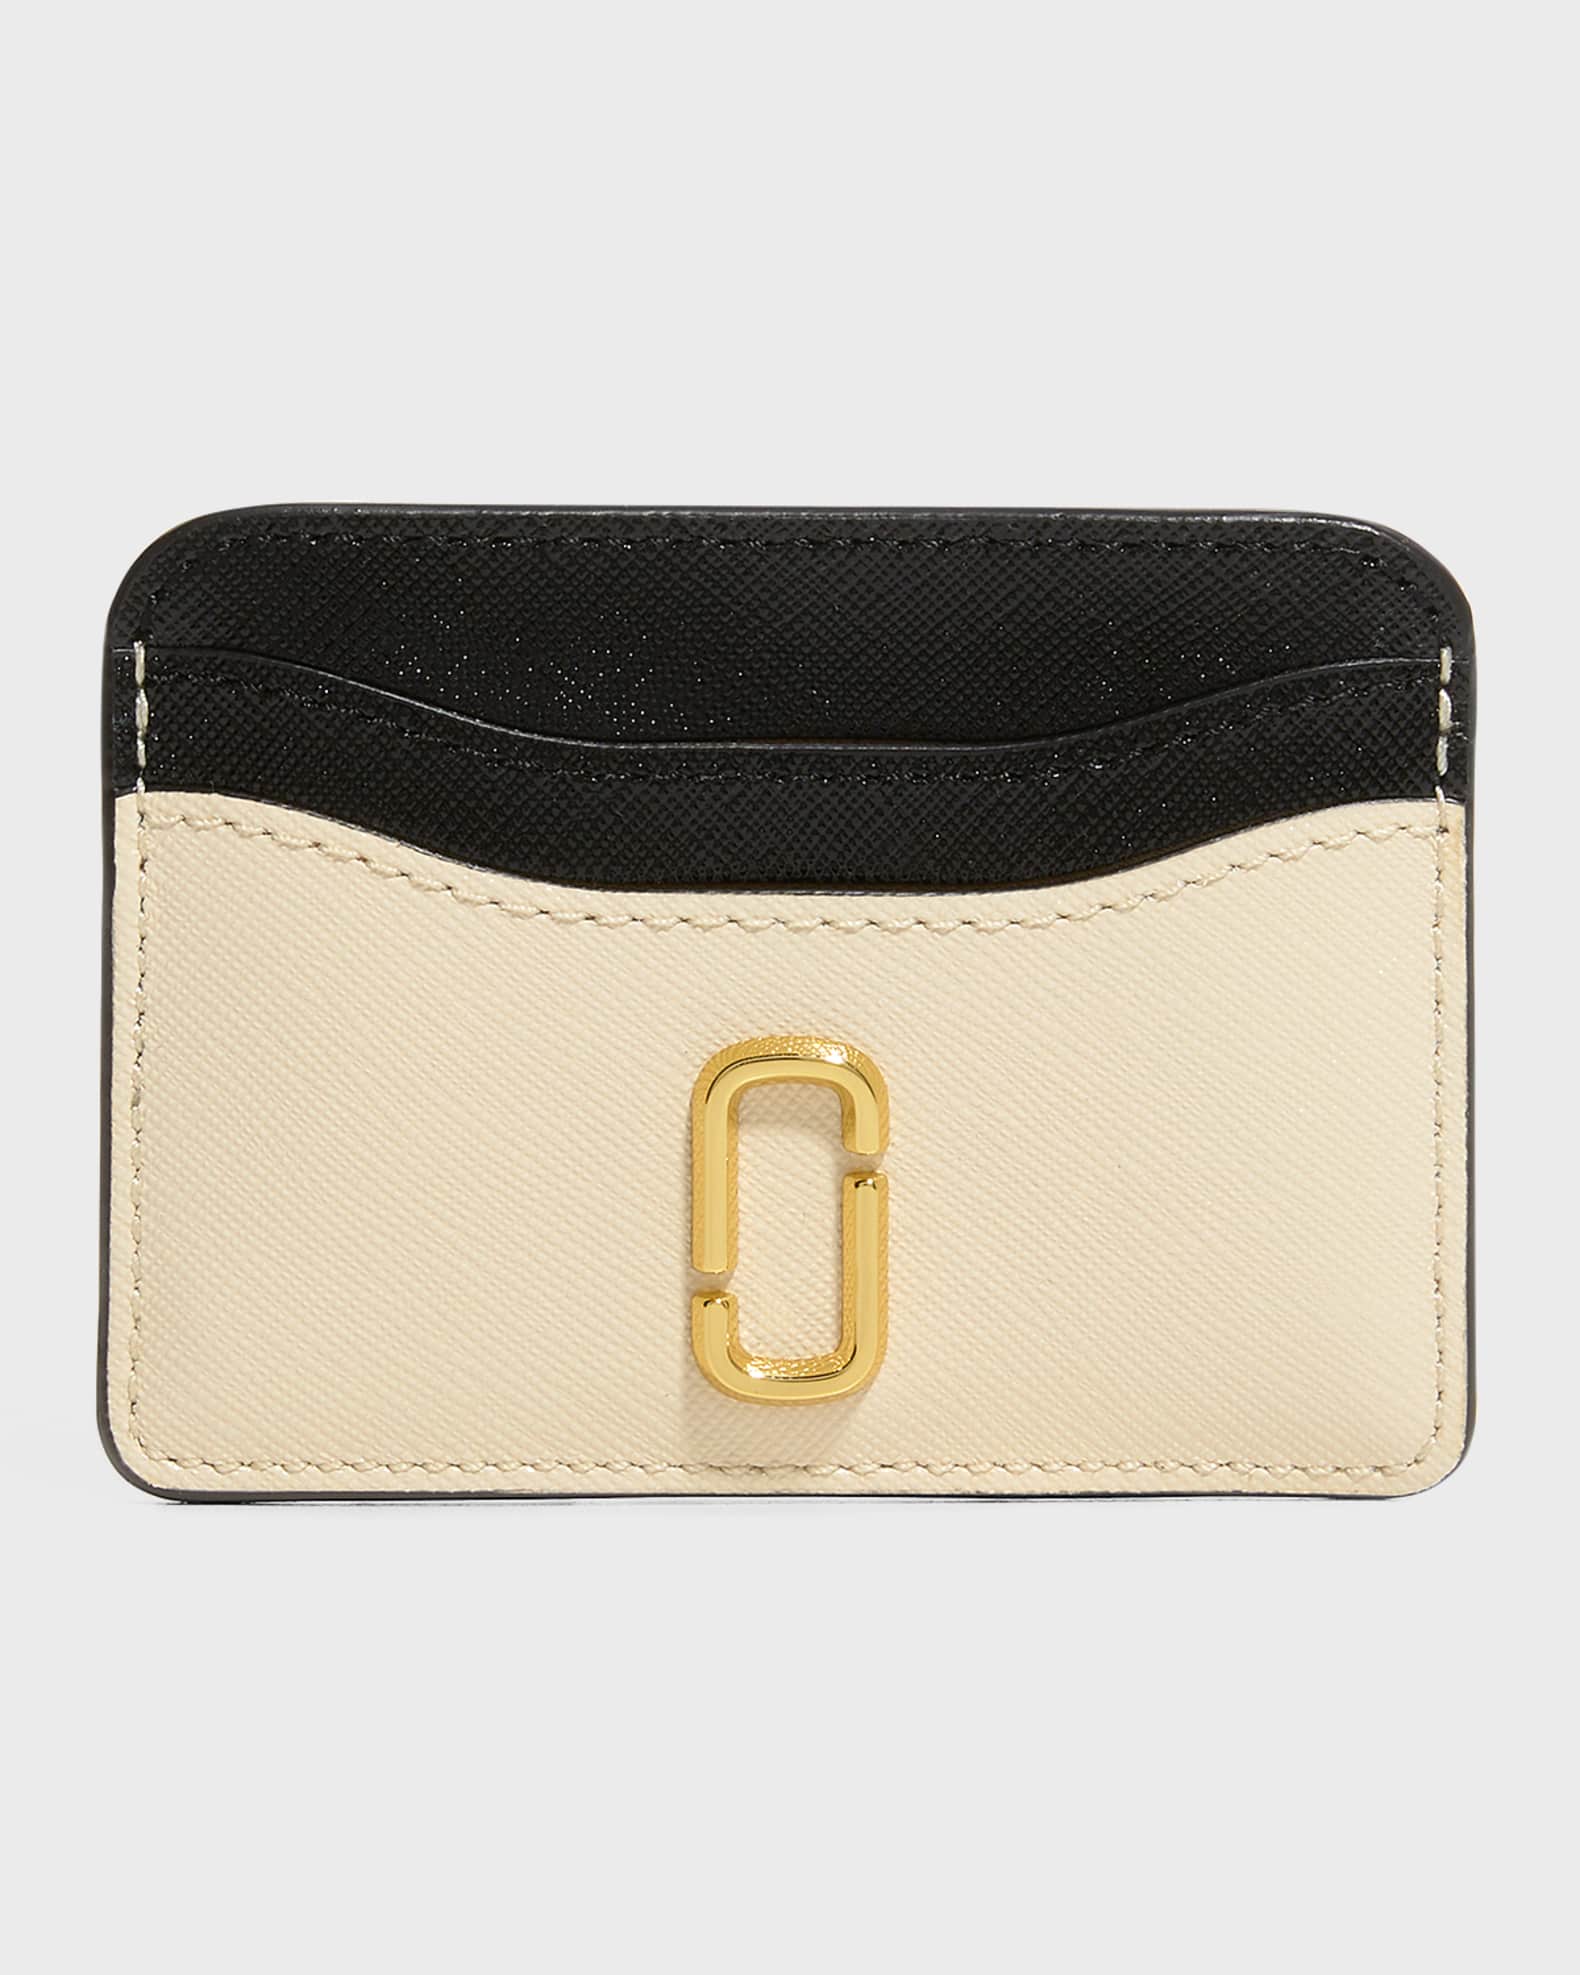 Marc Jacobs The Snapshot Card Case | Neiman Marcus